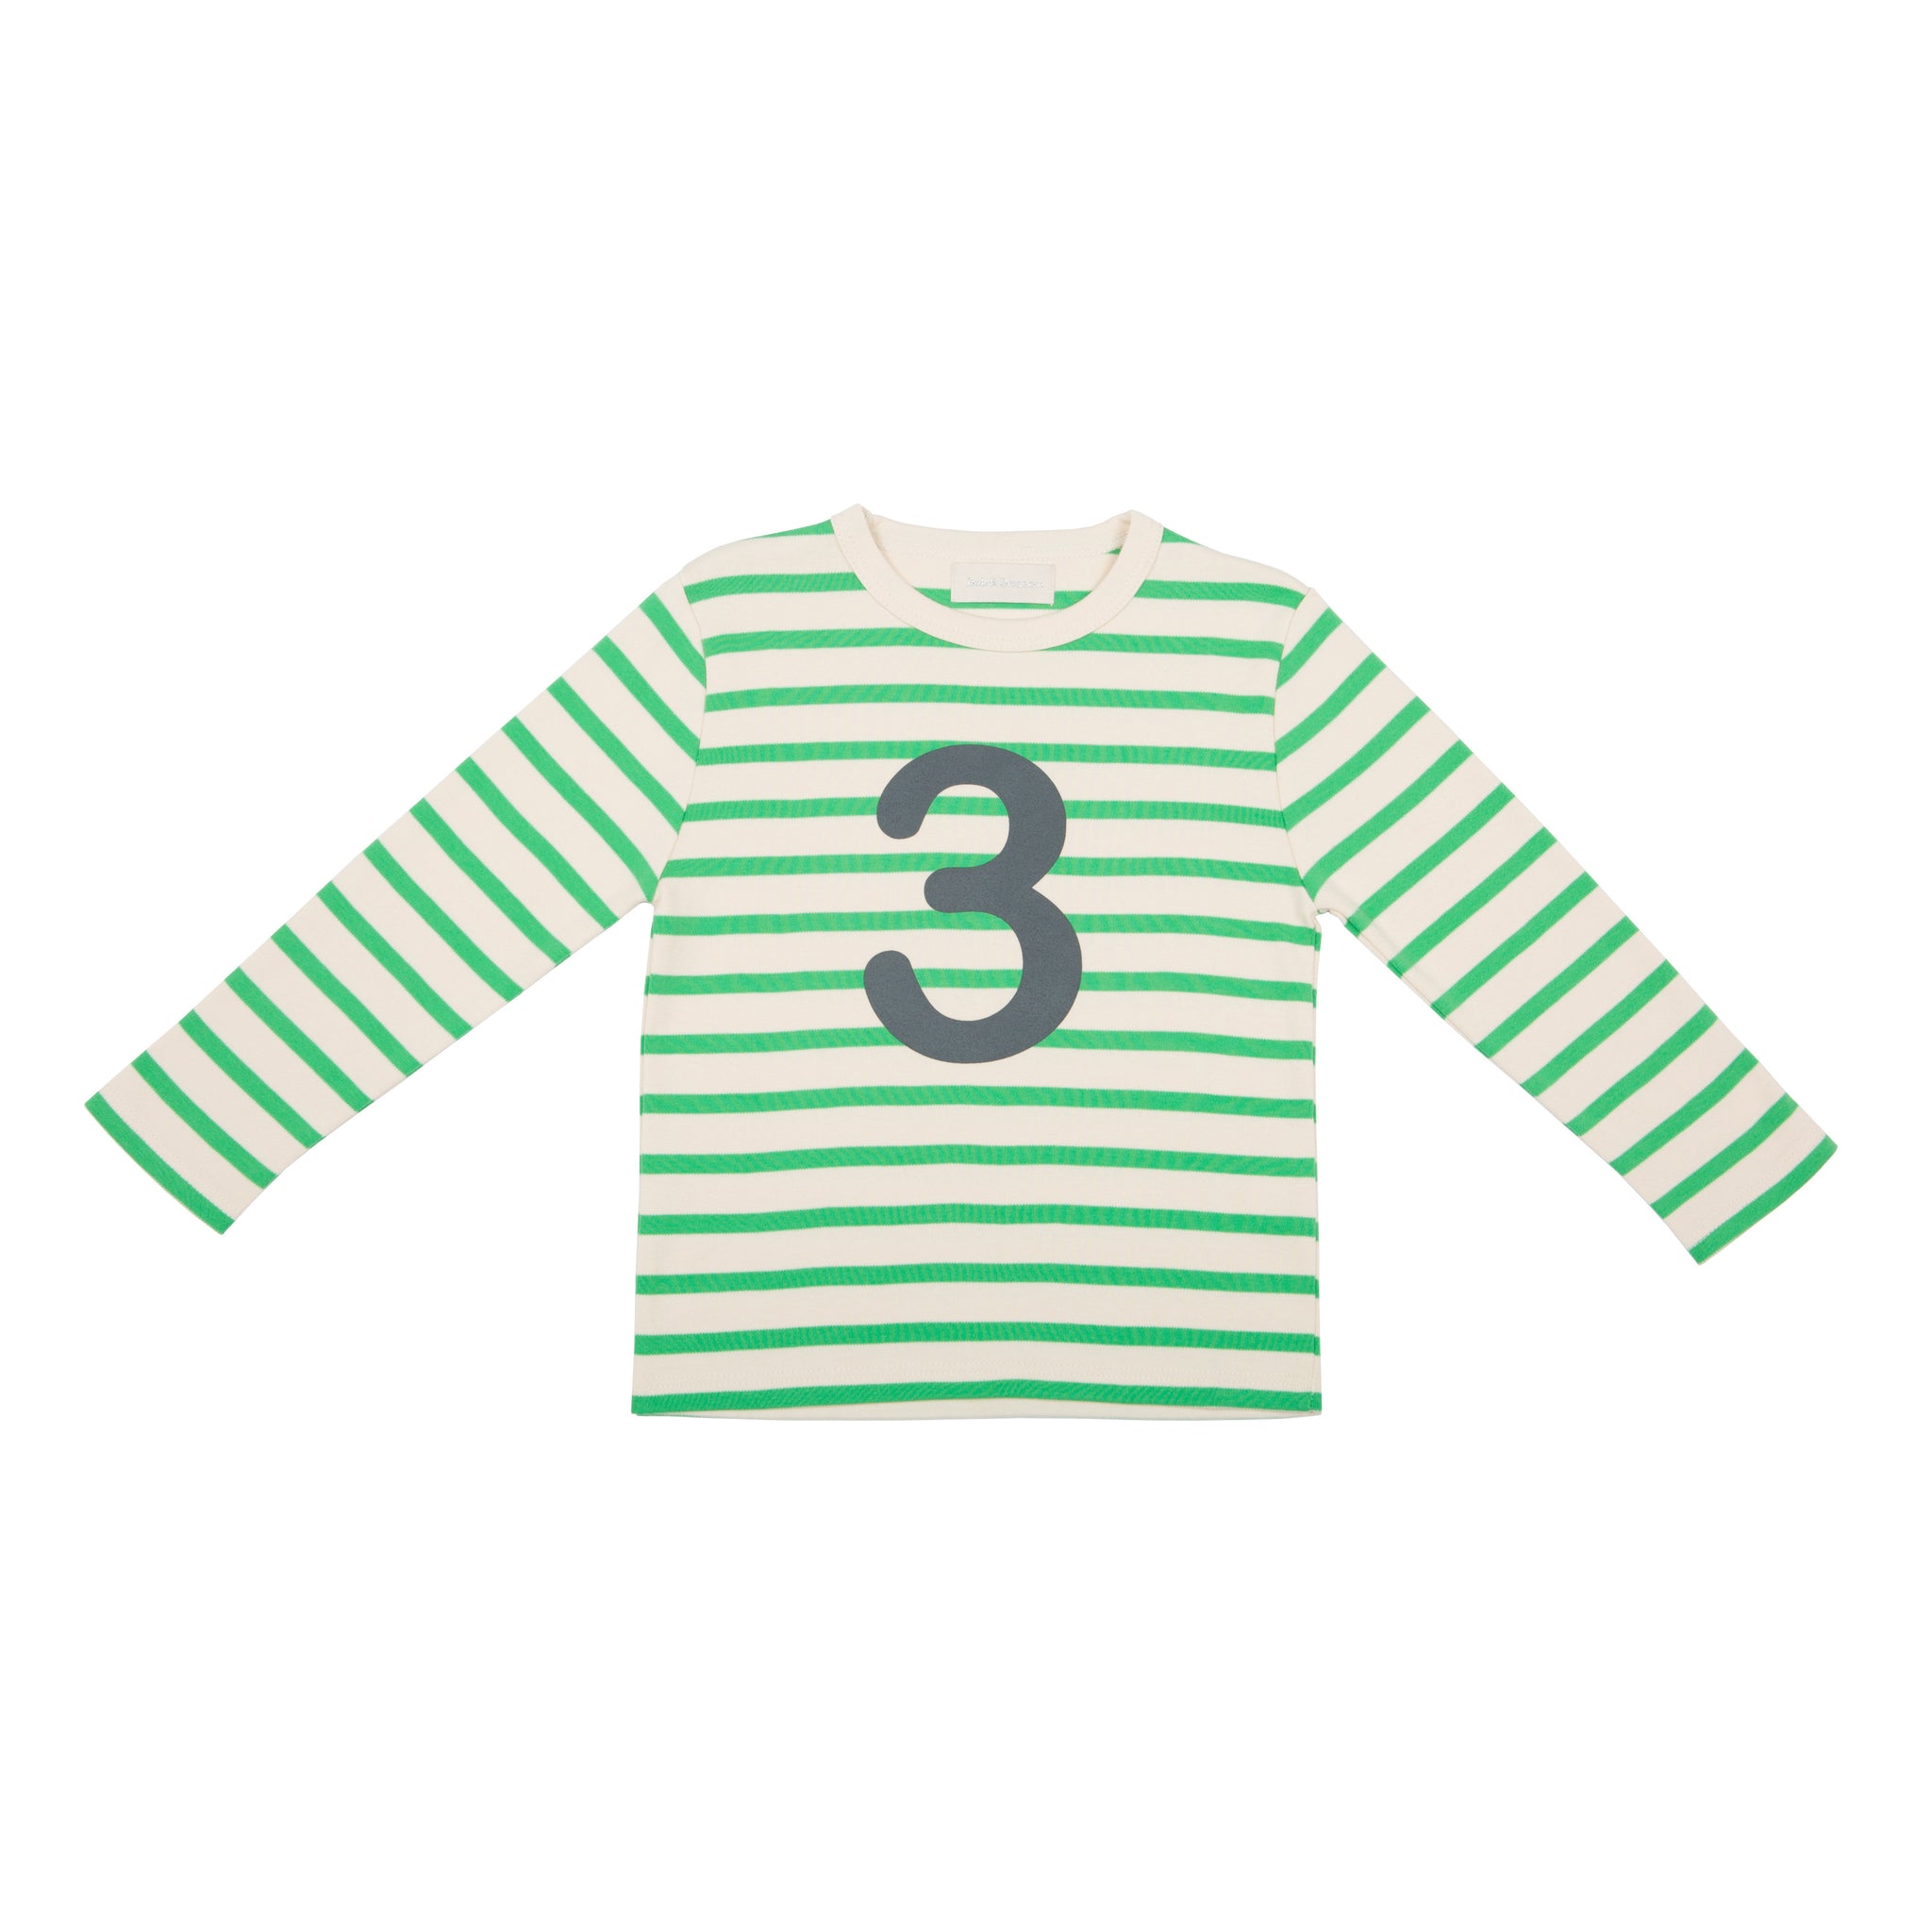 Striped Number T Shirt - Gooseberry & Cream 3-4 Years